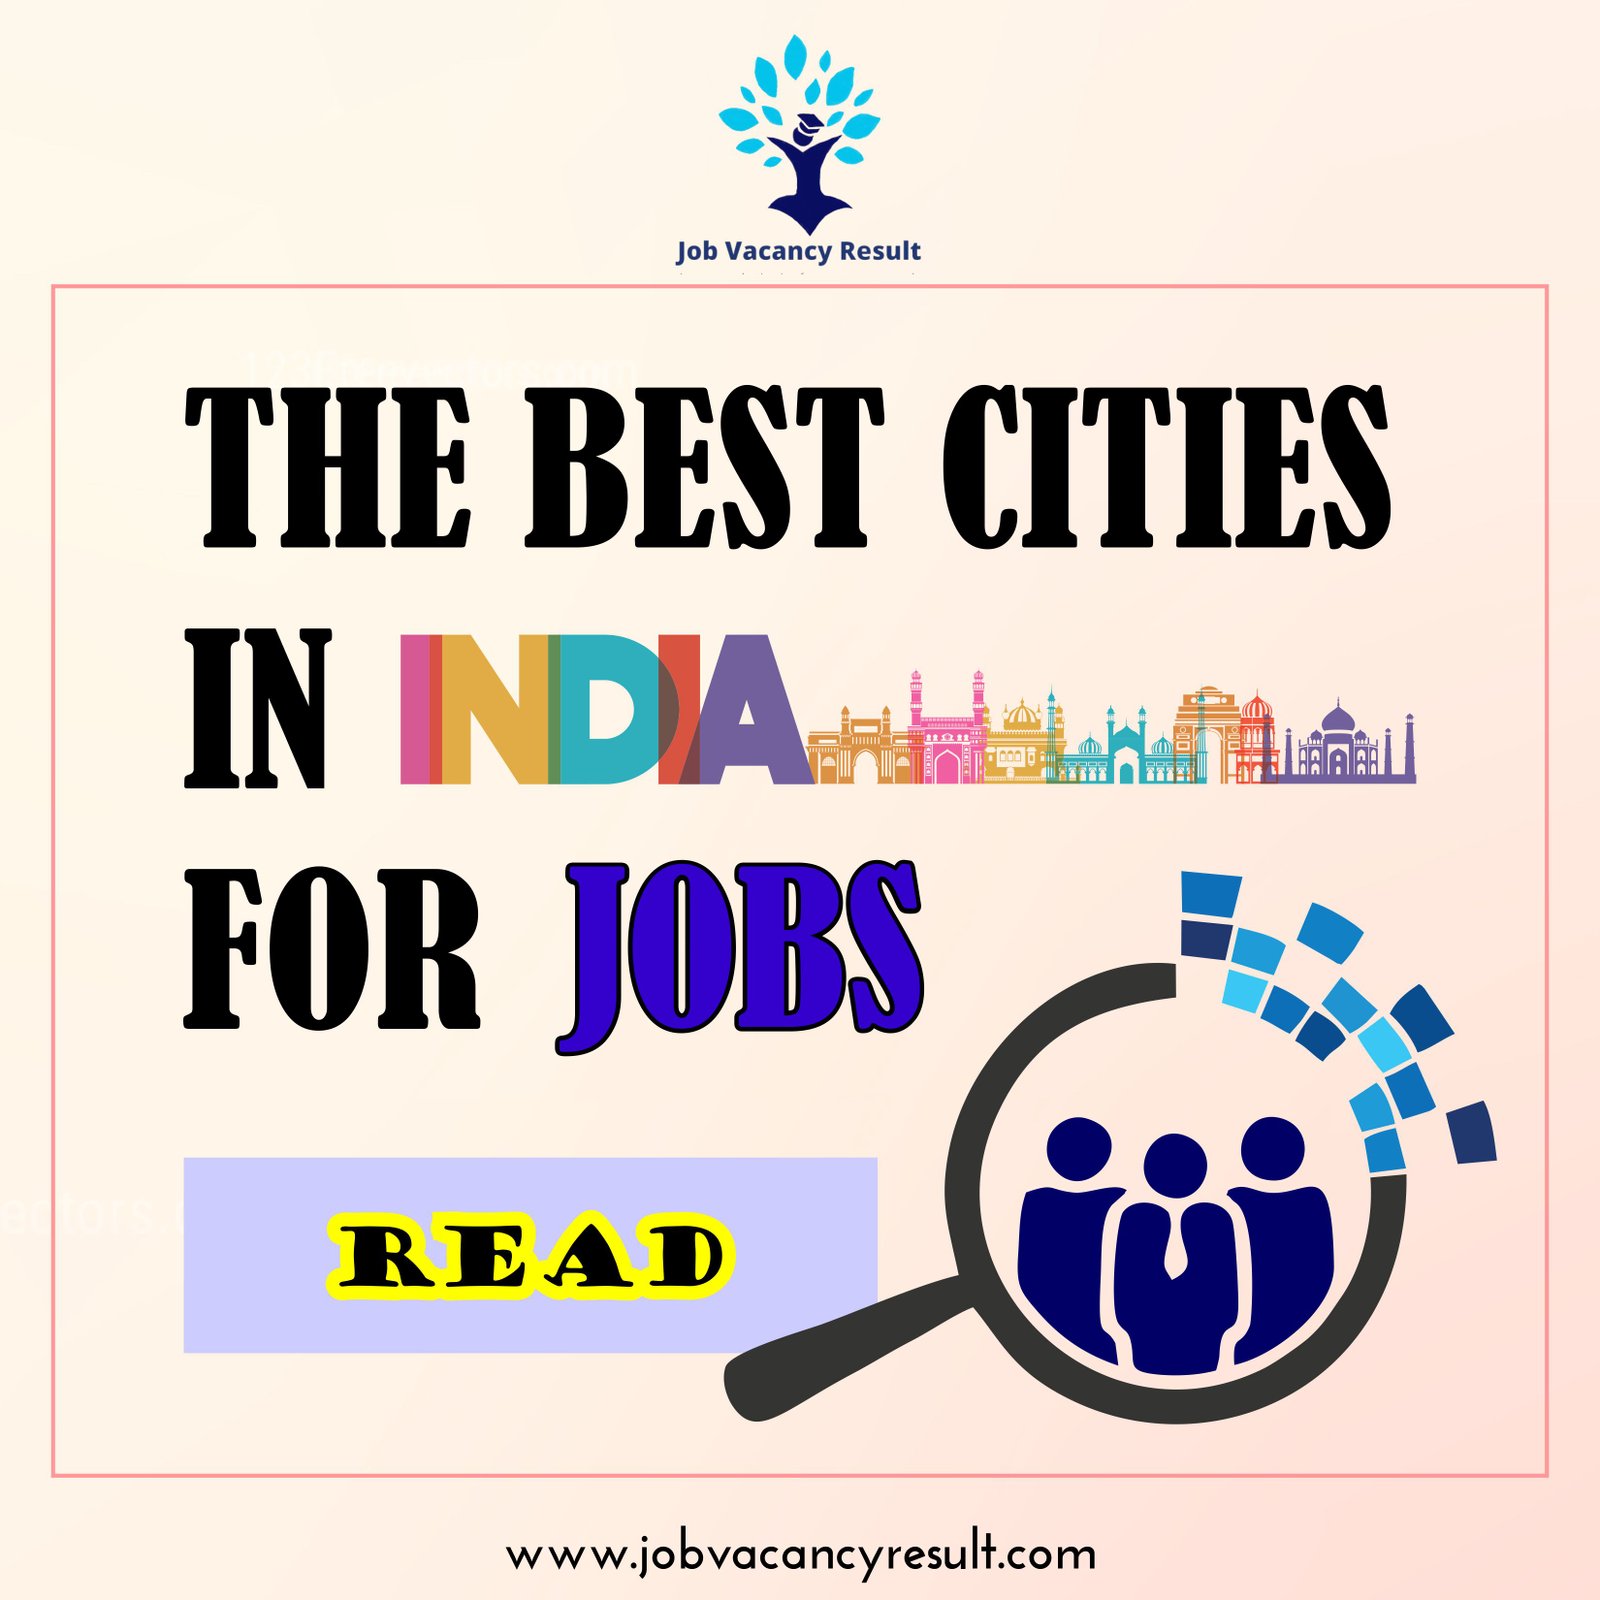 The best cities in India for jobs